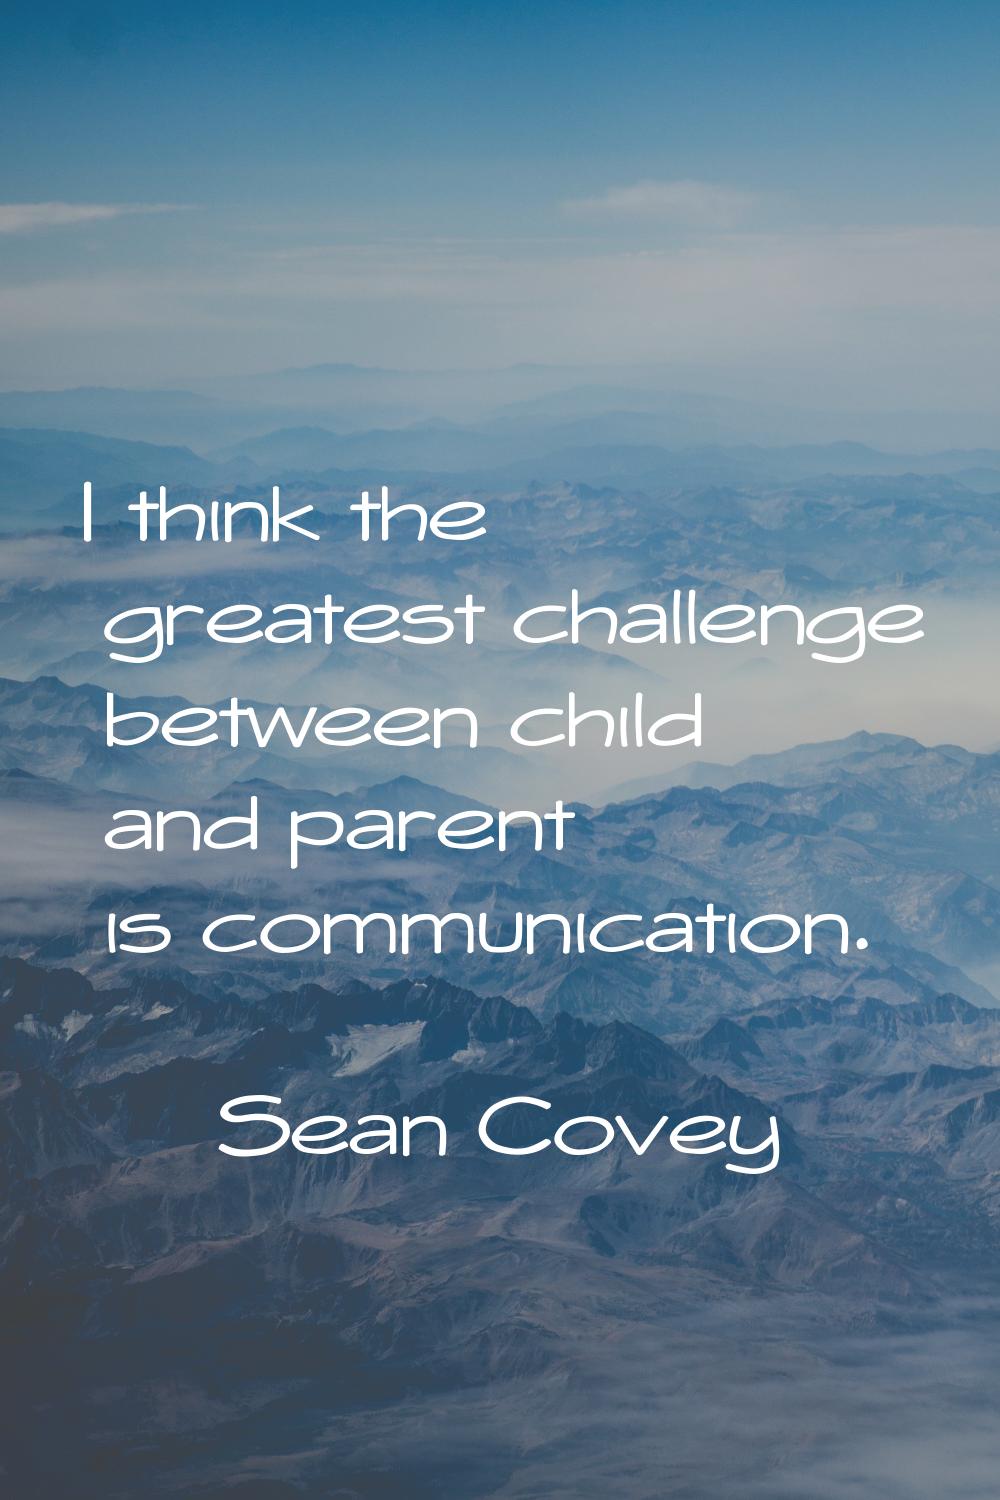 I think the greatest challenge between child and parent is communication.